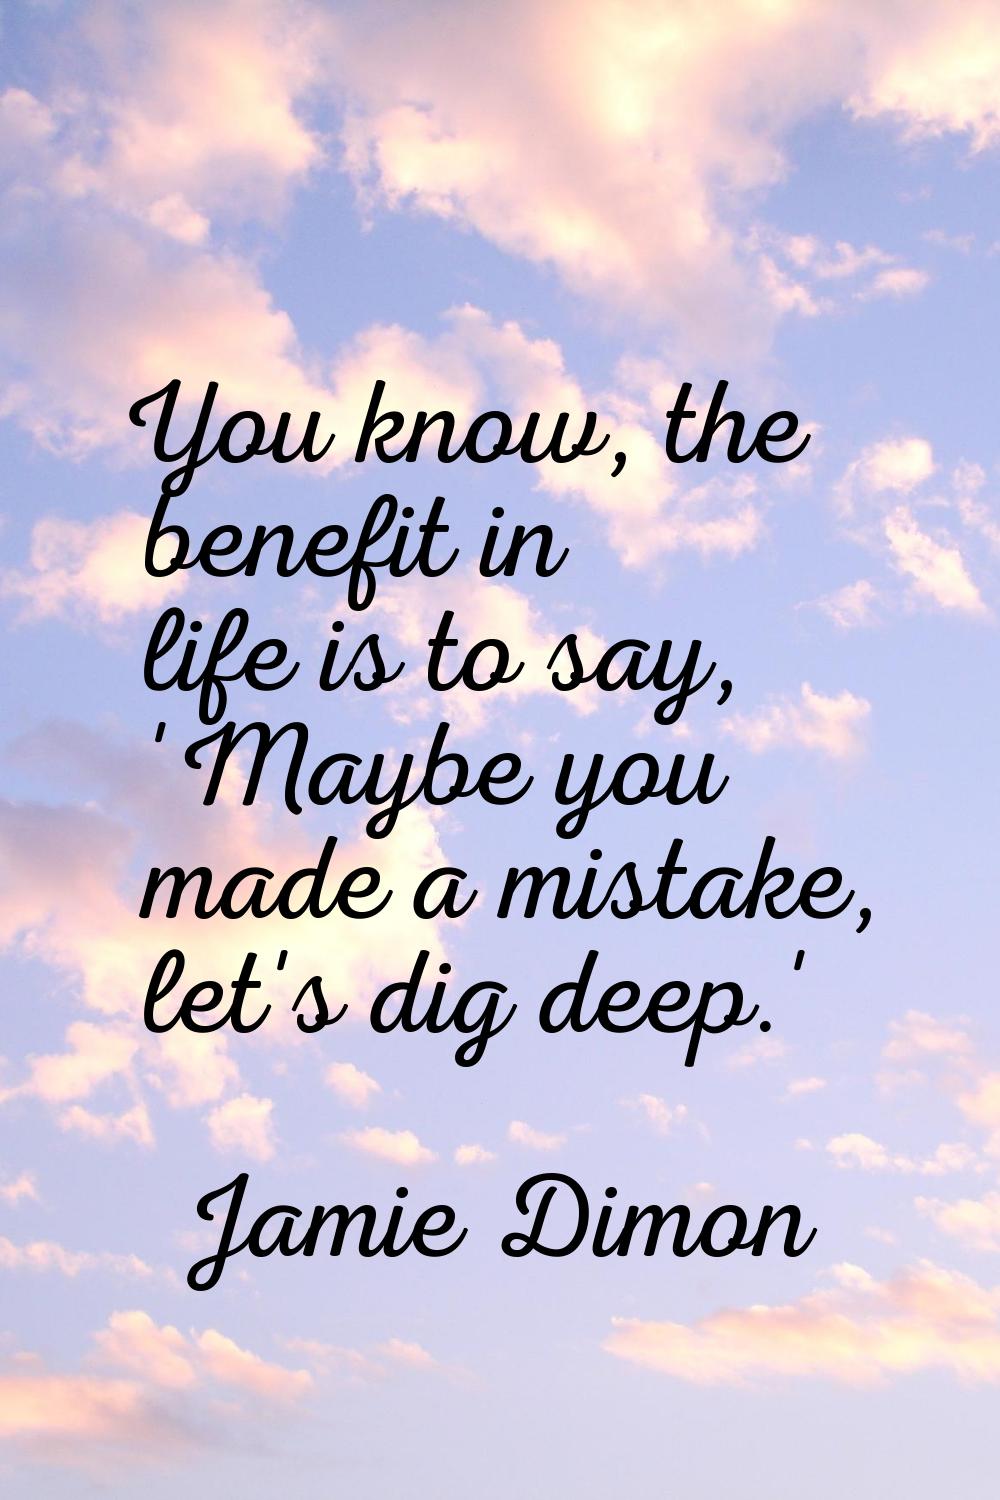 You know, the benefit in life is to say, 'Maybe you made a mistake, let's dig deep.'